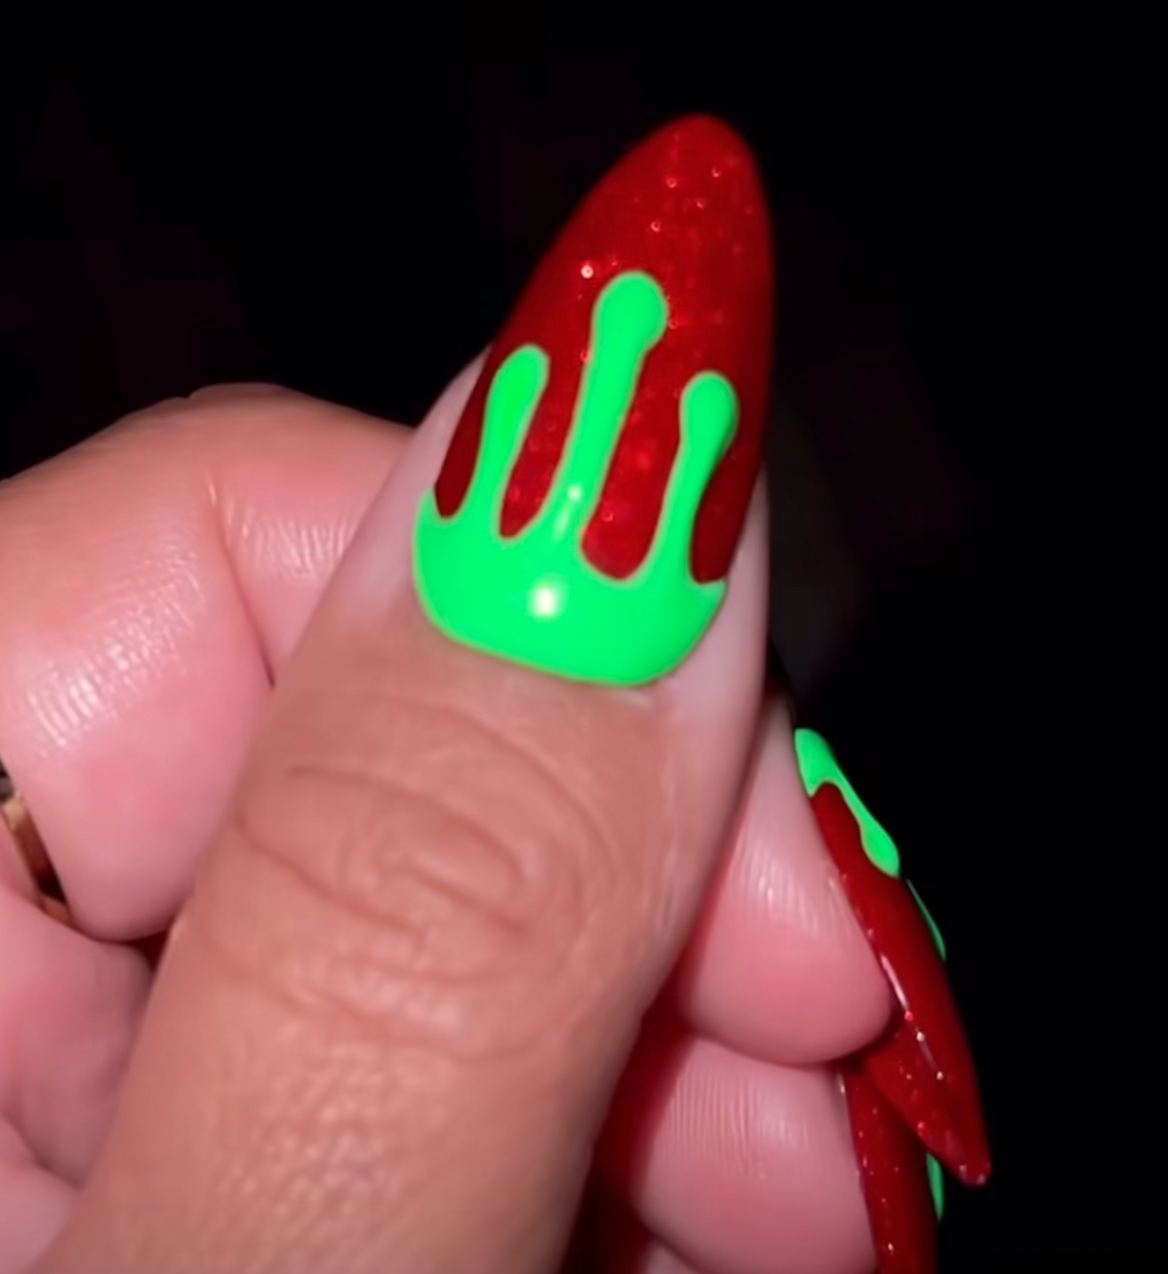 Poisonous apples never looked so tempting as shown by @nailartbyjen on IG (bonus: she has a tutorial video too!)